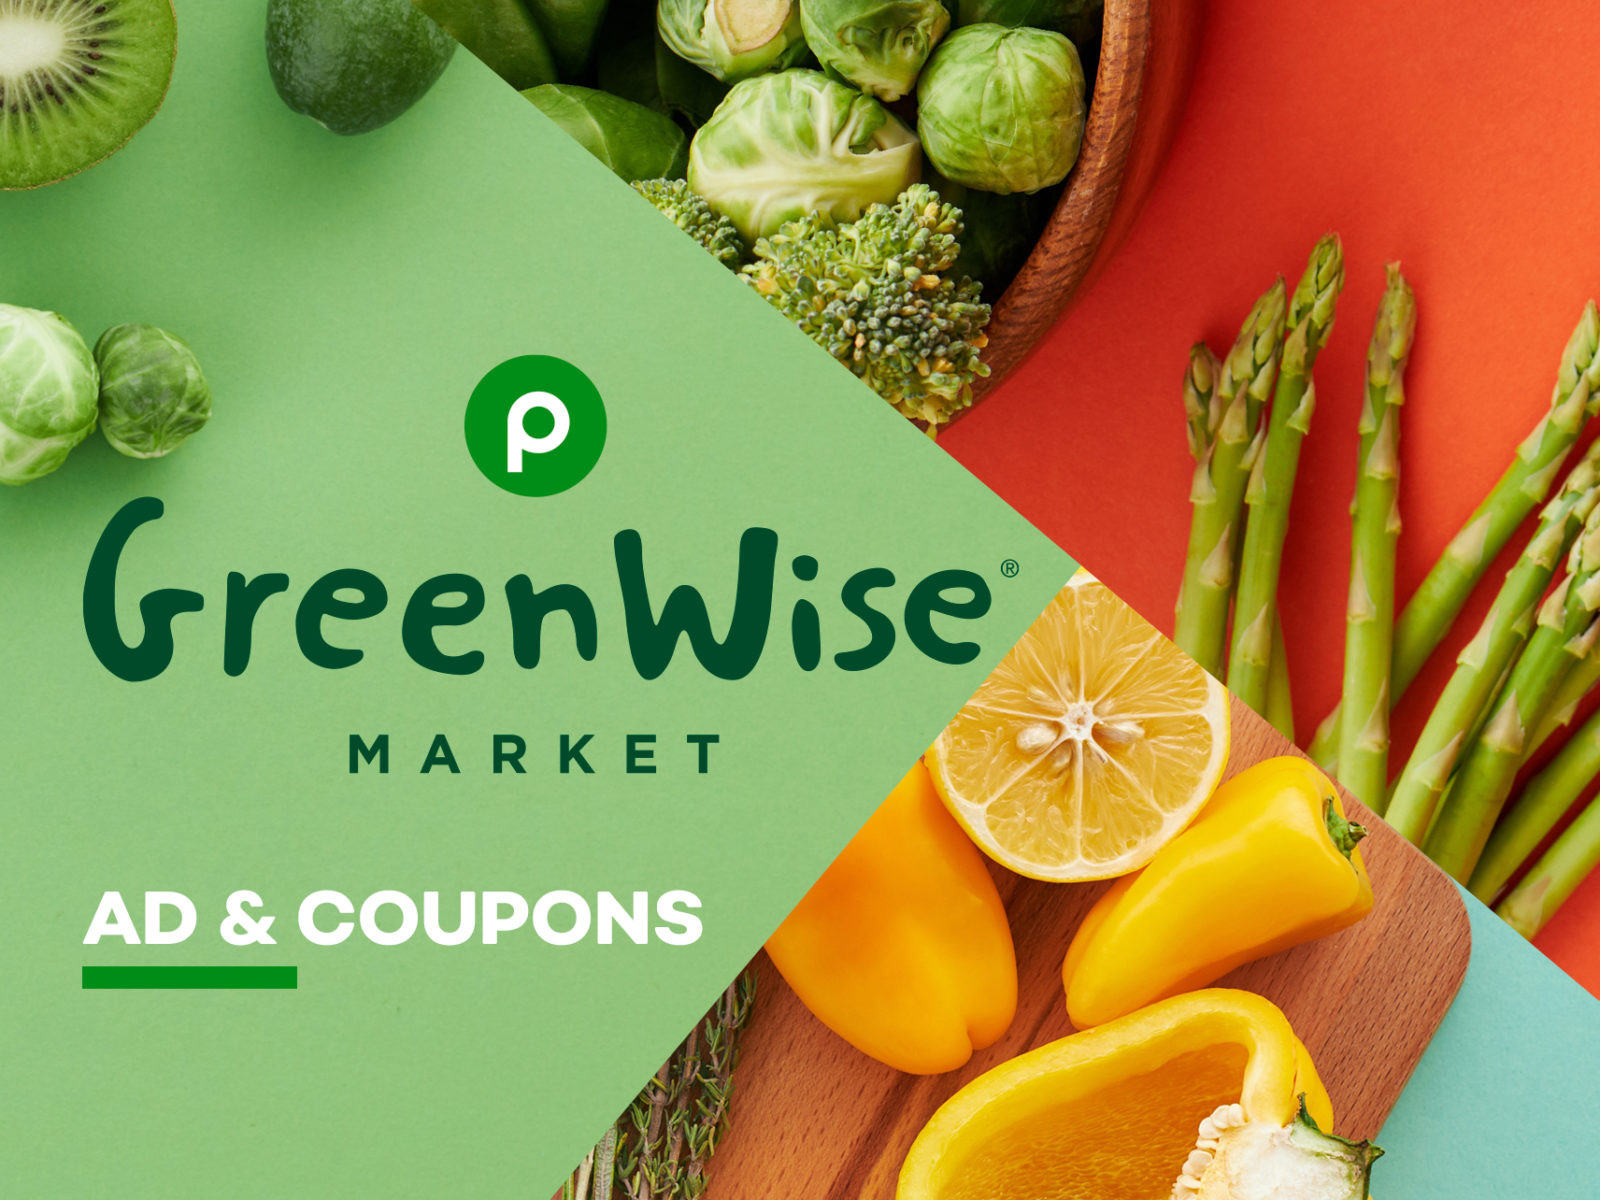 Publix GreenWise Market Ad & Coupons Week Of 10/20 to 10/26 (10/19 to 10/25 For Some)